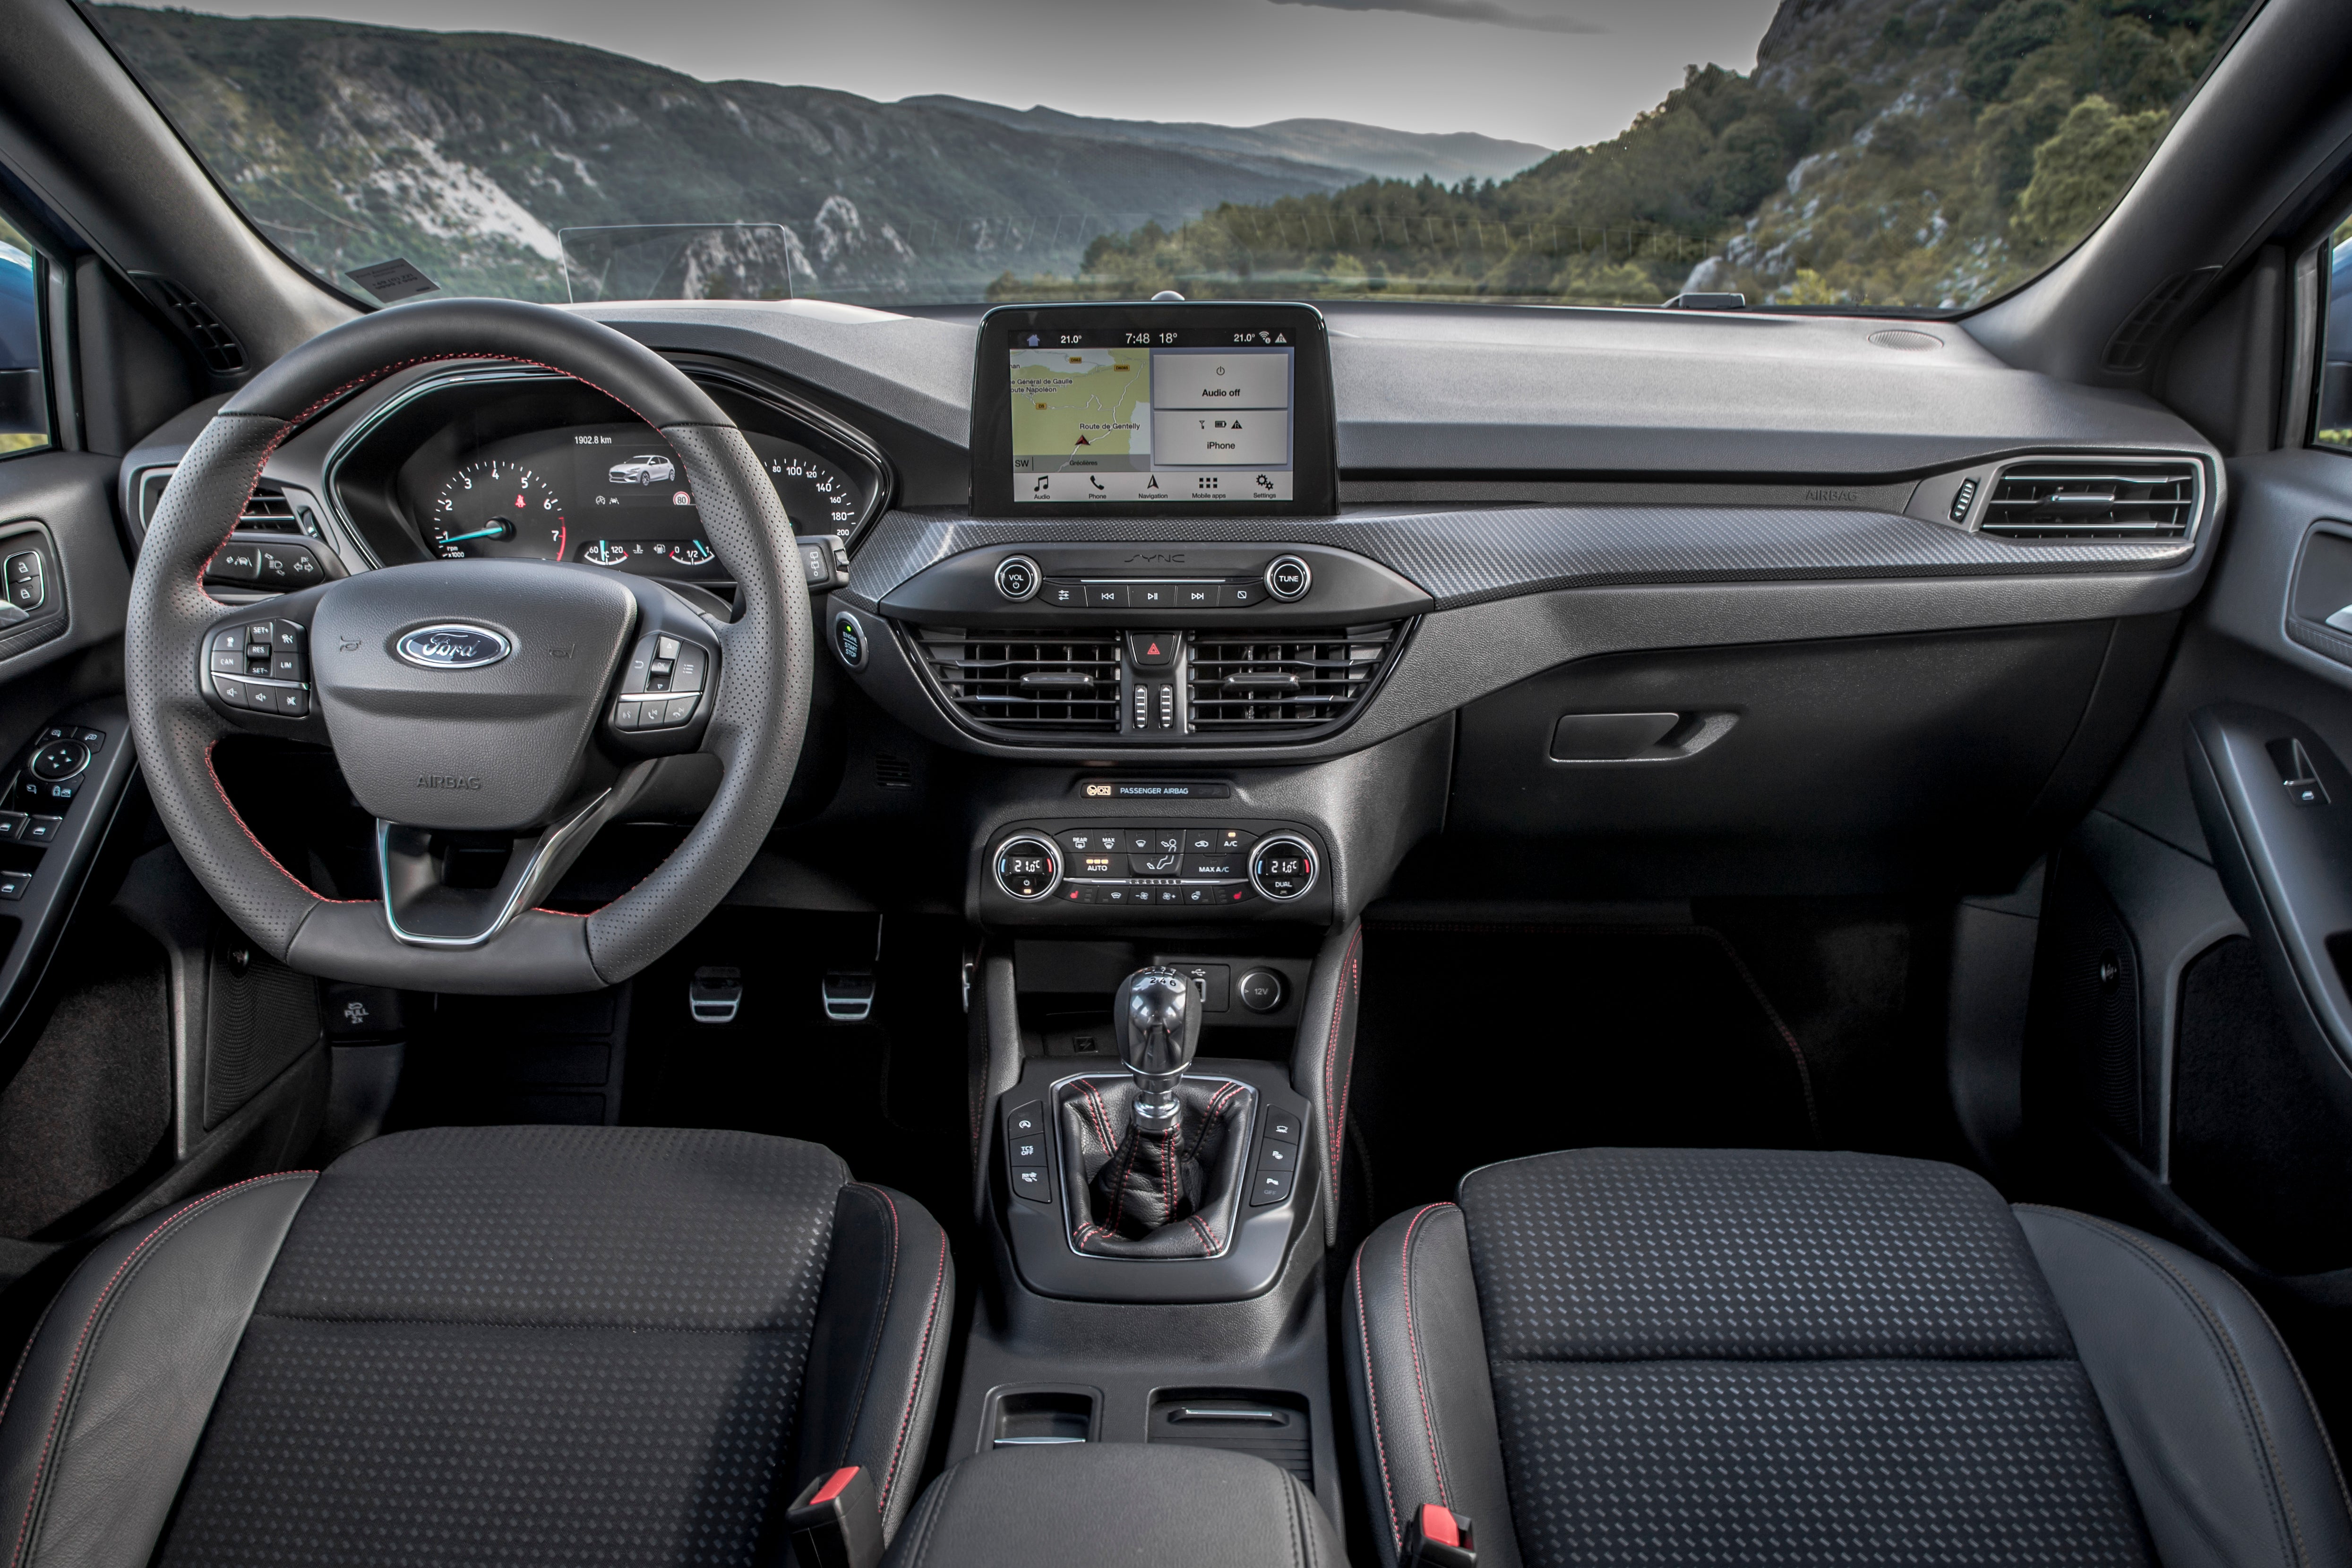 Ford Focus Review 2022: Interior 